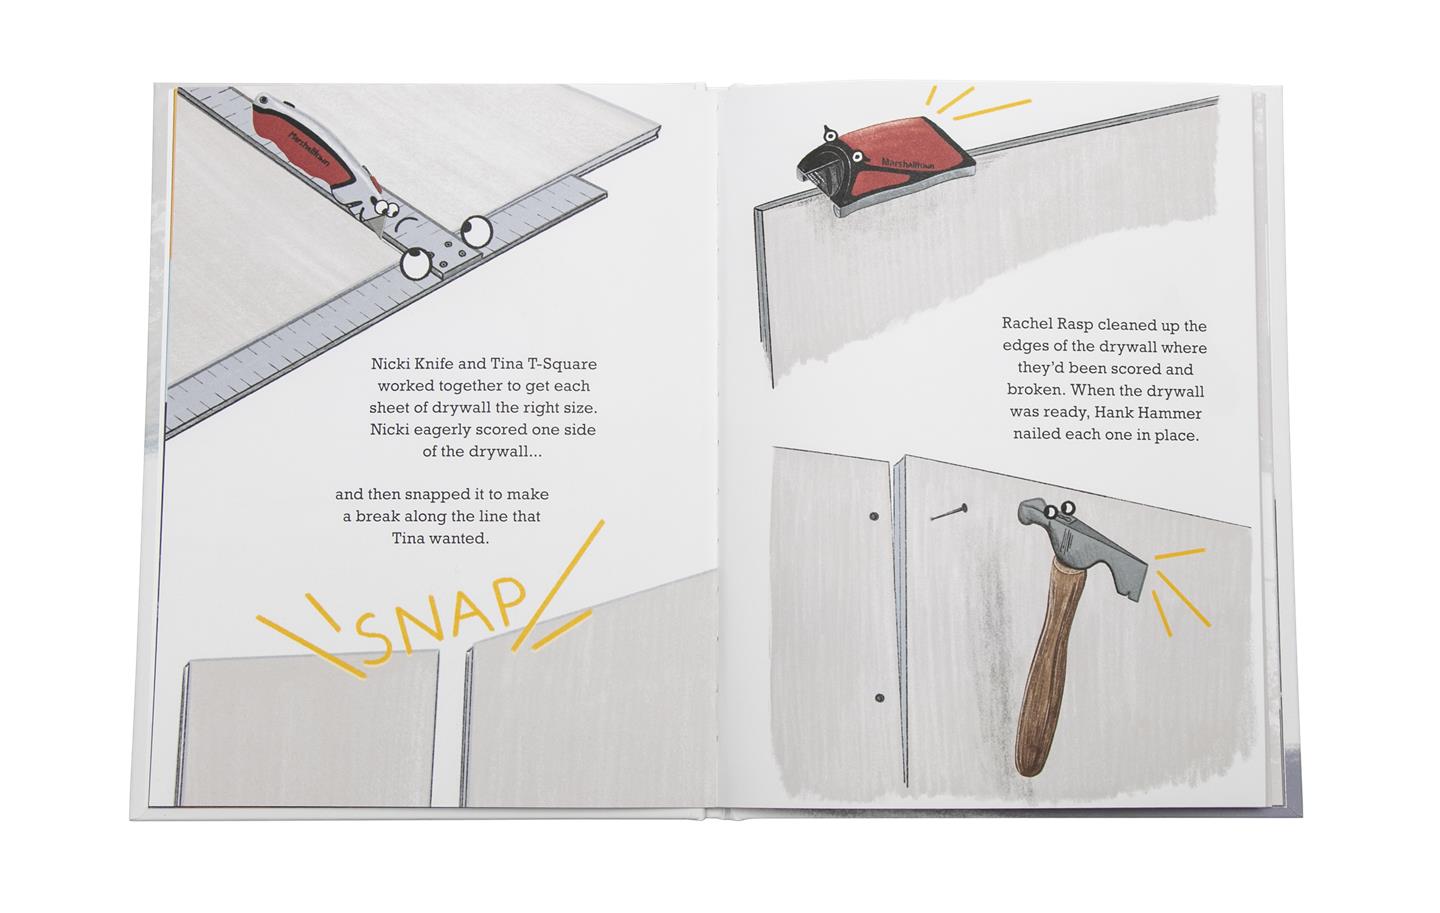 Marshalltown 10072 Marshall T. Trowel and Family - Drywall - You Can Be Anything You Want to Be. Children Book.